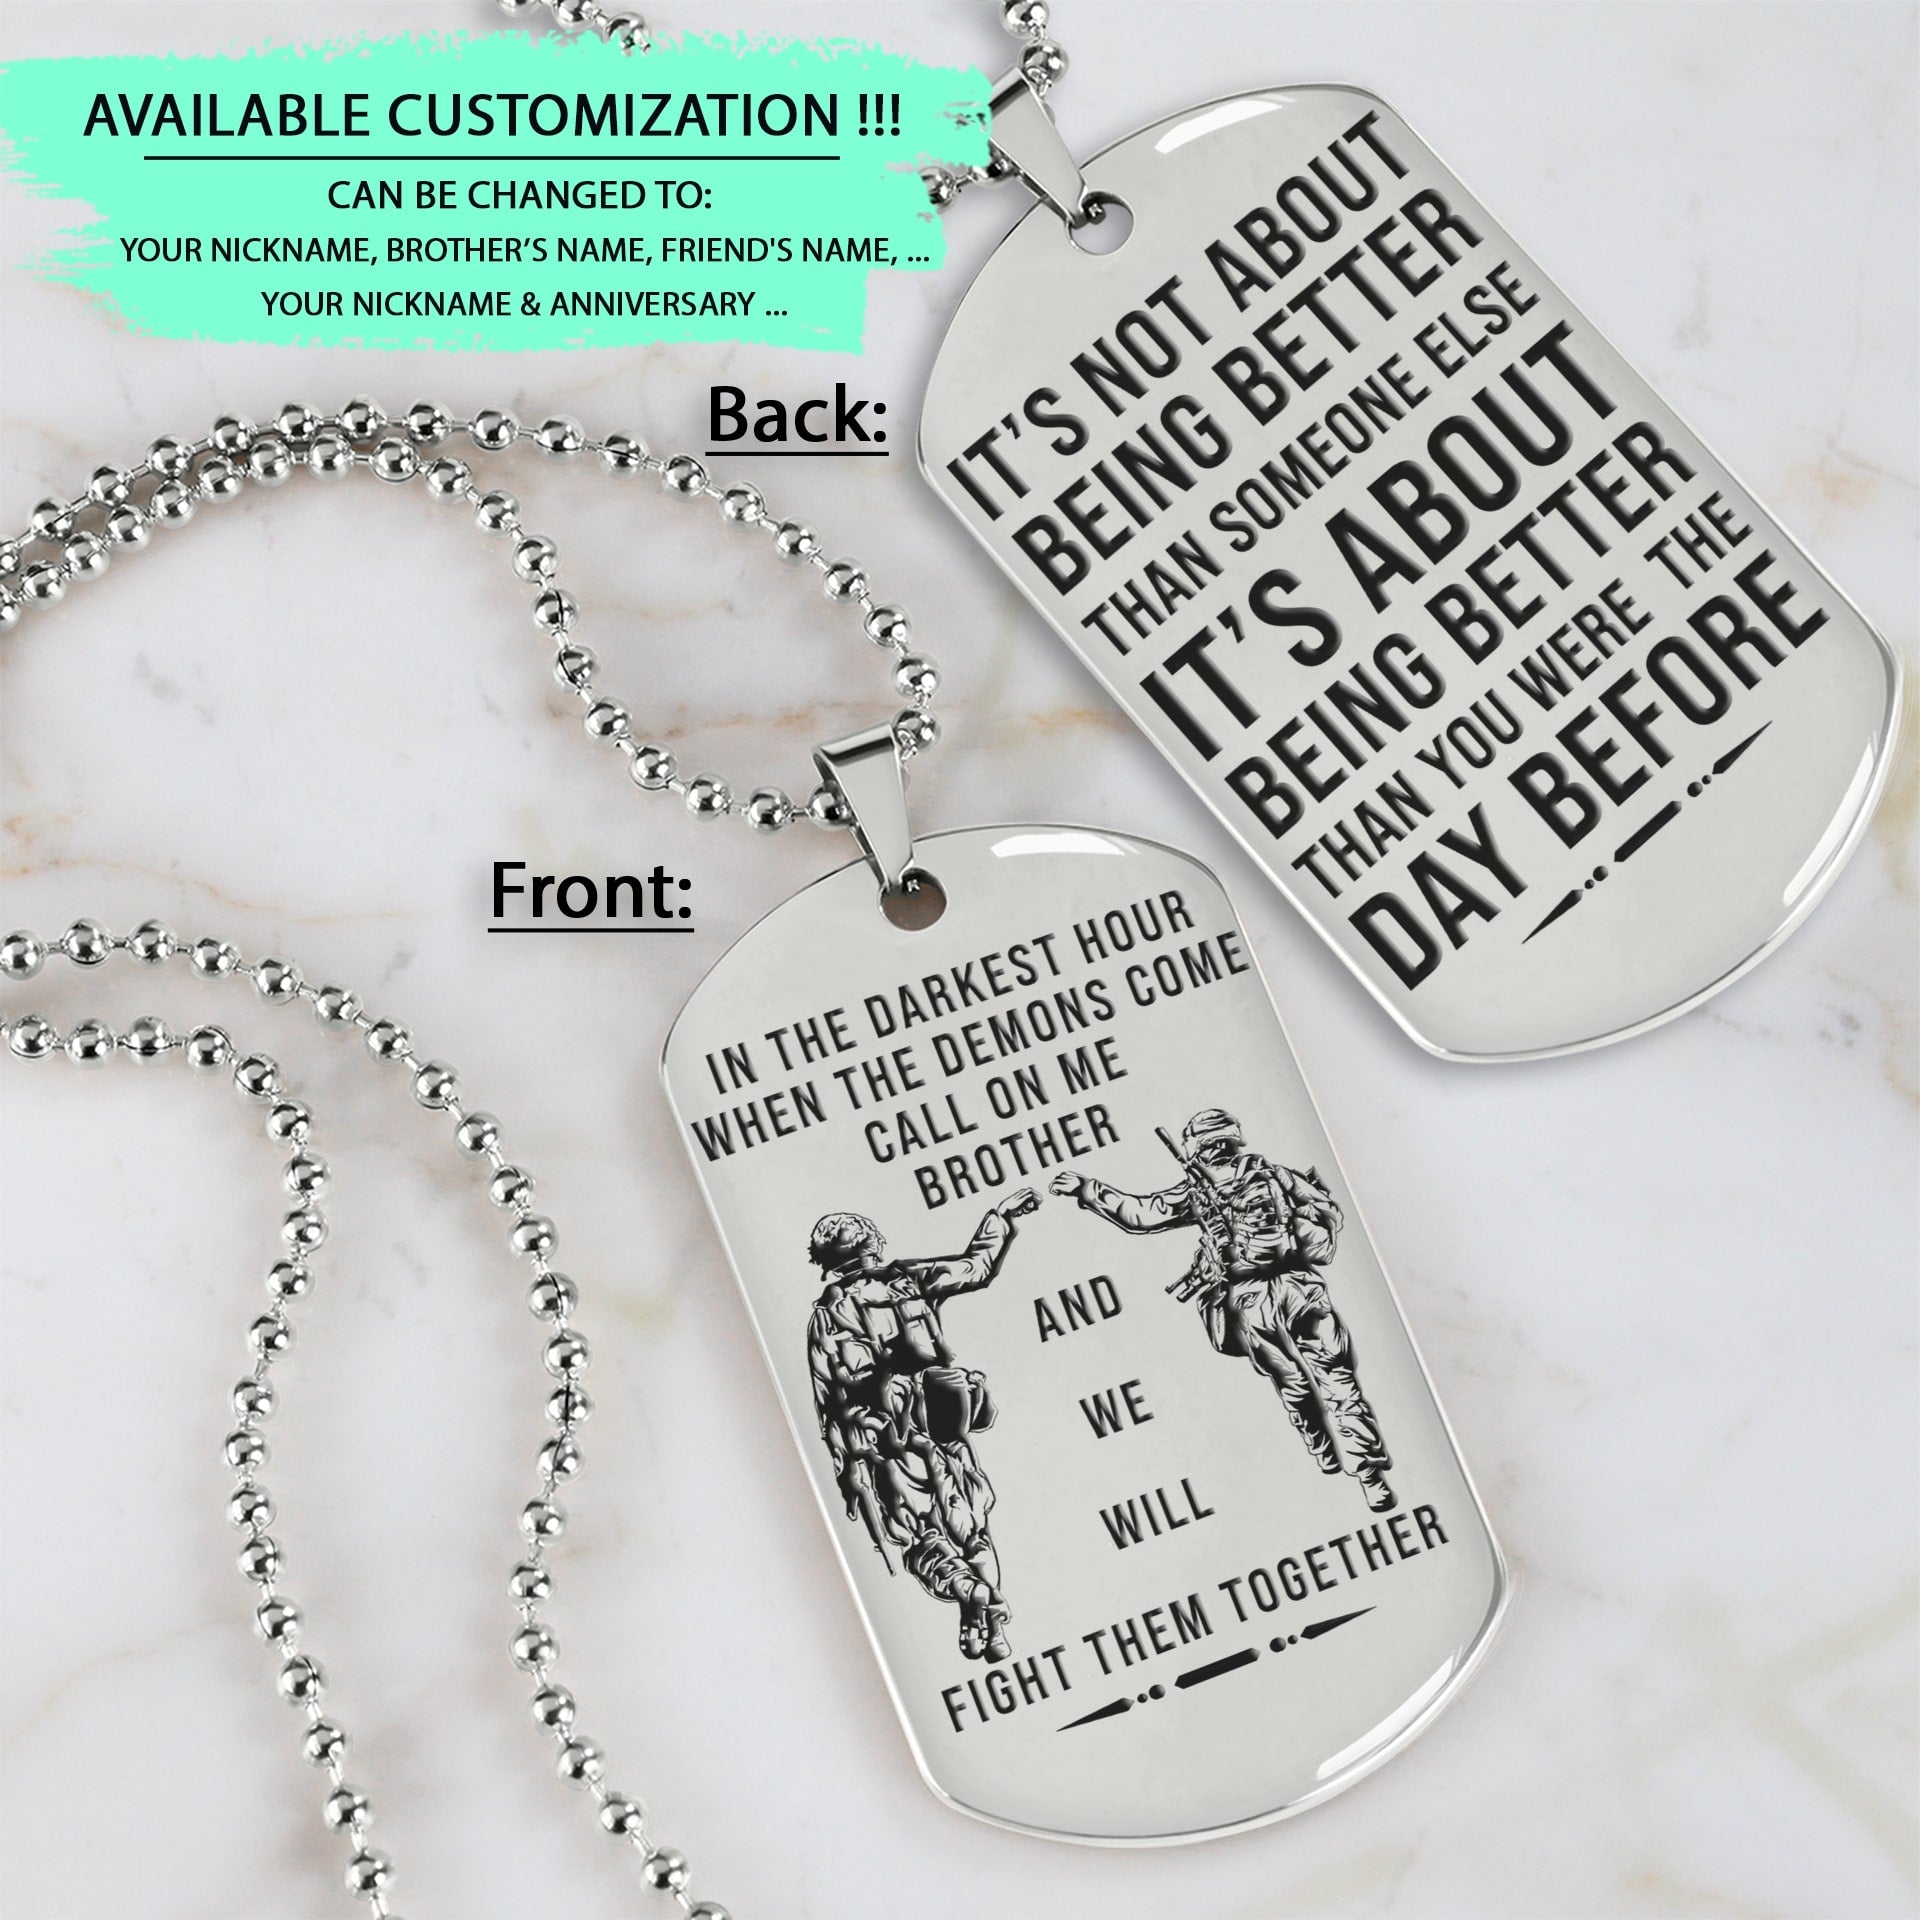 Biker's Prayer - Military Dog Tag Chain Necklace – The Gift Eternal